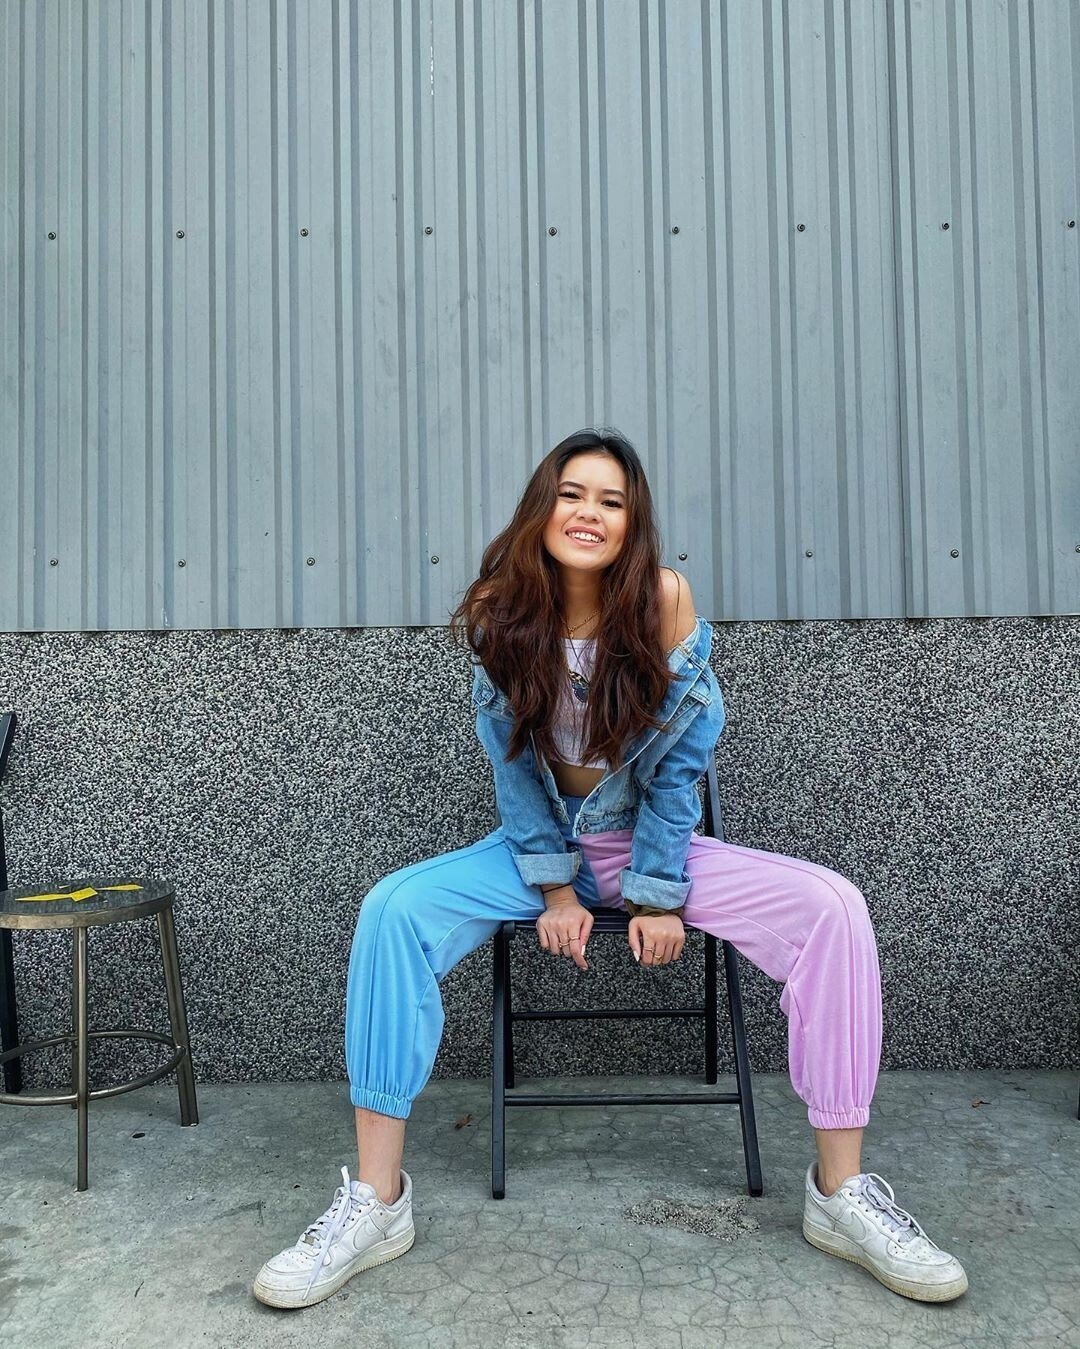 Malaysia’s Cupcake Aisyah uploaded her first video when she was just 13 years old. Seven years later, she has survived harassment from haters and even a hacking incident in 2019 to become one of her country’s top YouTube personalities. Photo: courtesy of Cupcake Aisyah